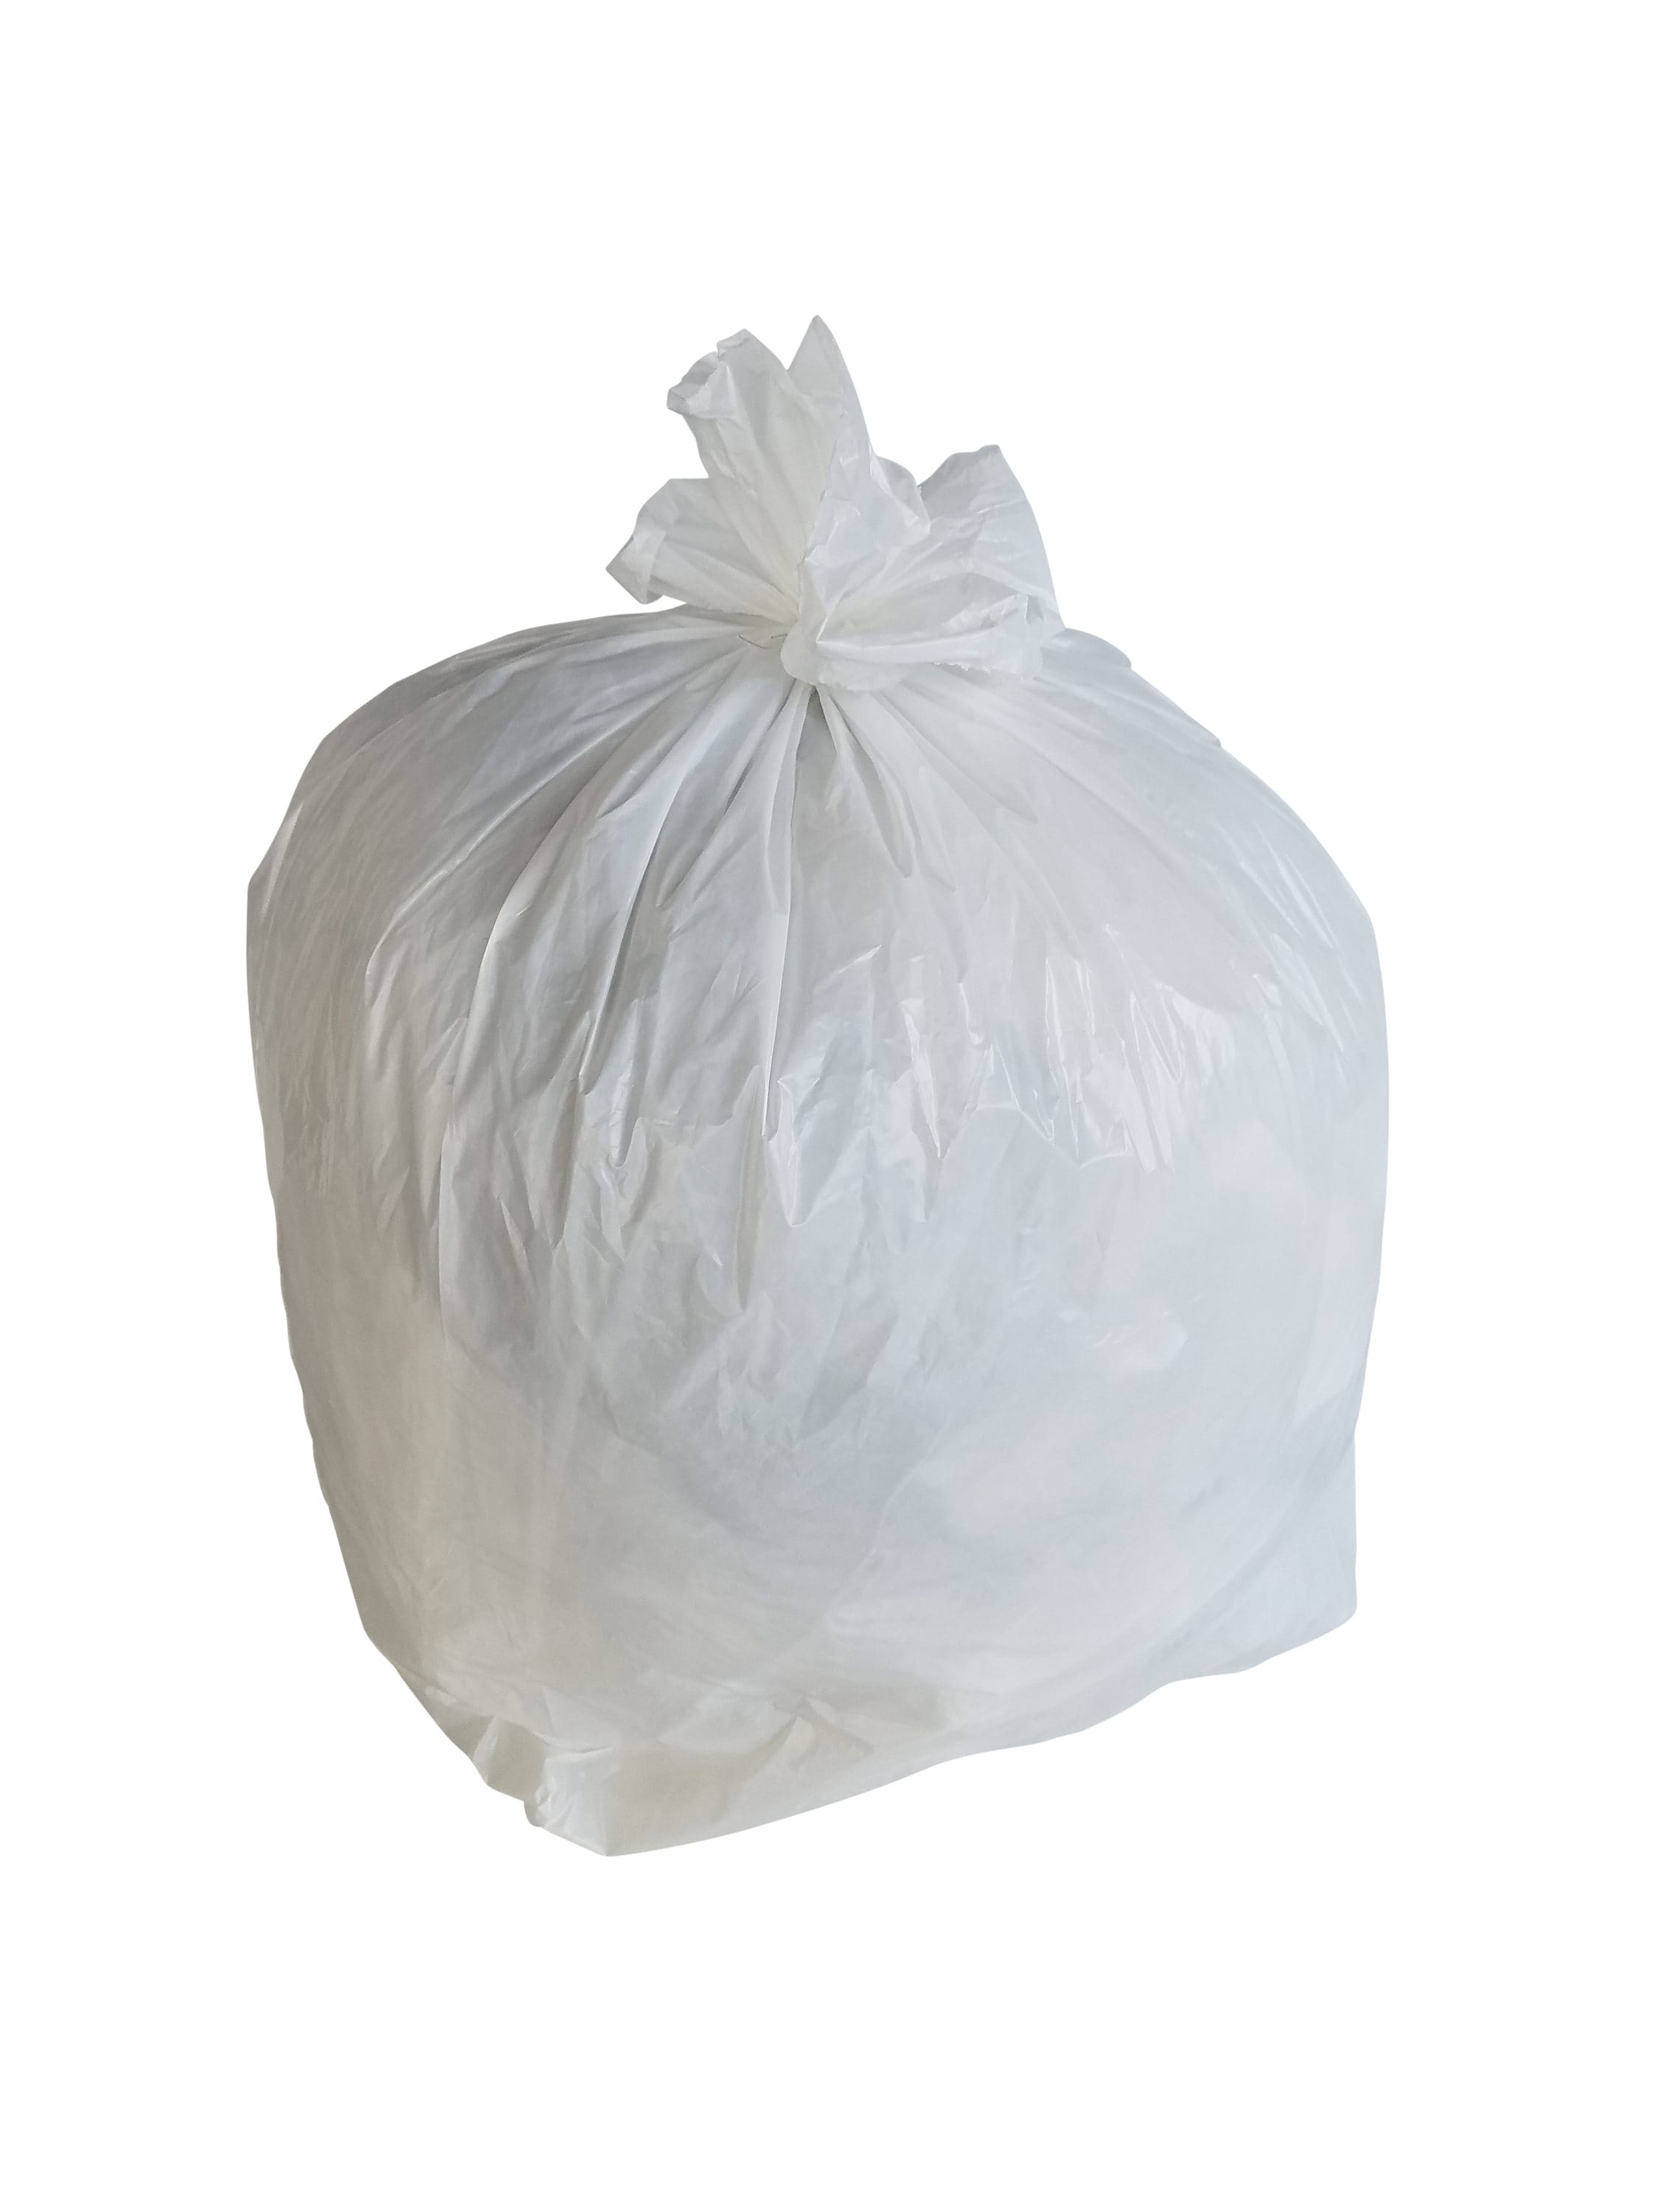 PlasticMill 33 Gallon, White, .7 mil, 33x39, 150 Bags/Case, Garbage Bags.